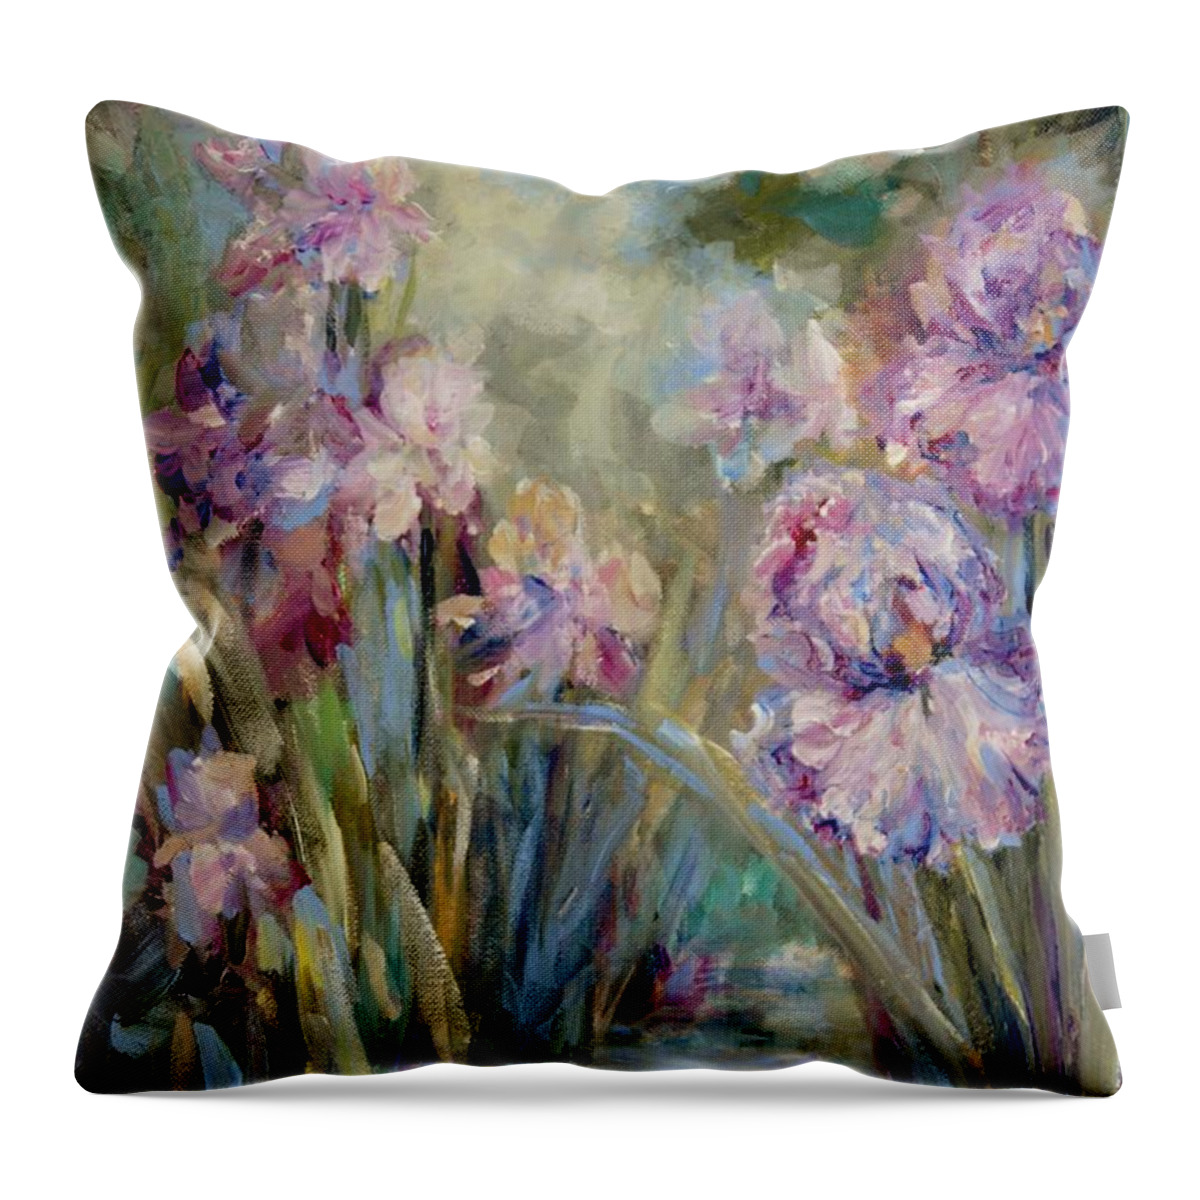 Iris Throw Pillow featuring the painting Iris Garden by Mary Wolf